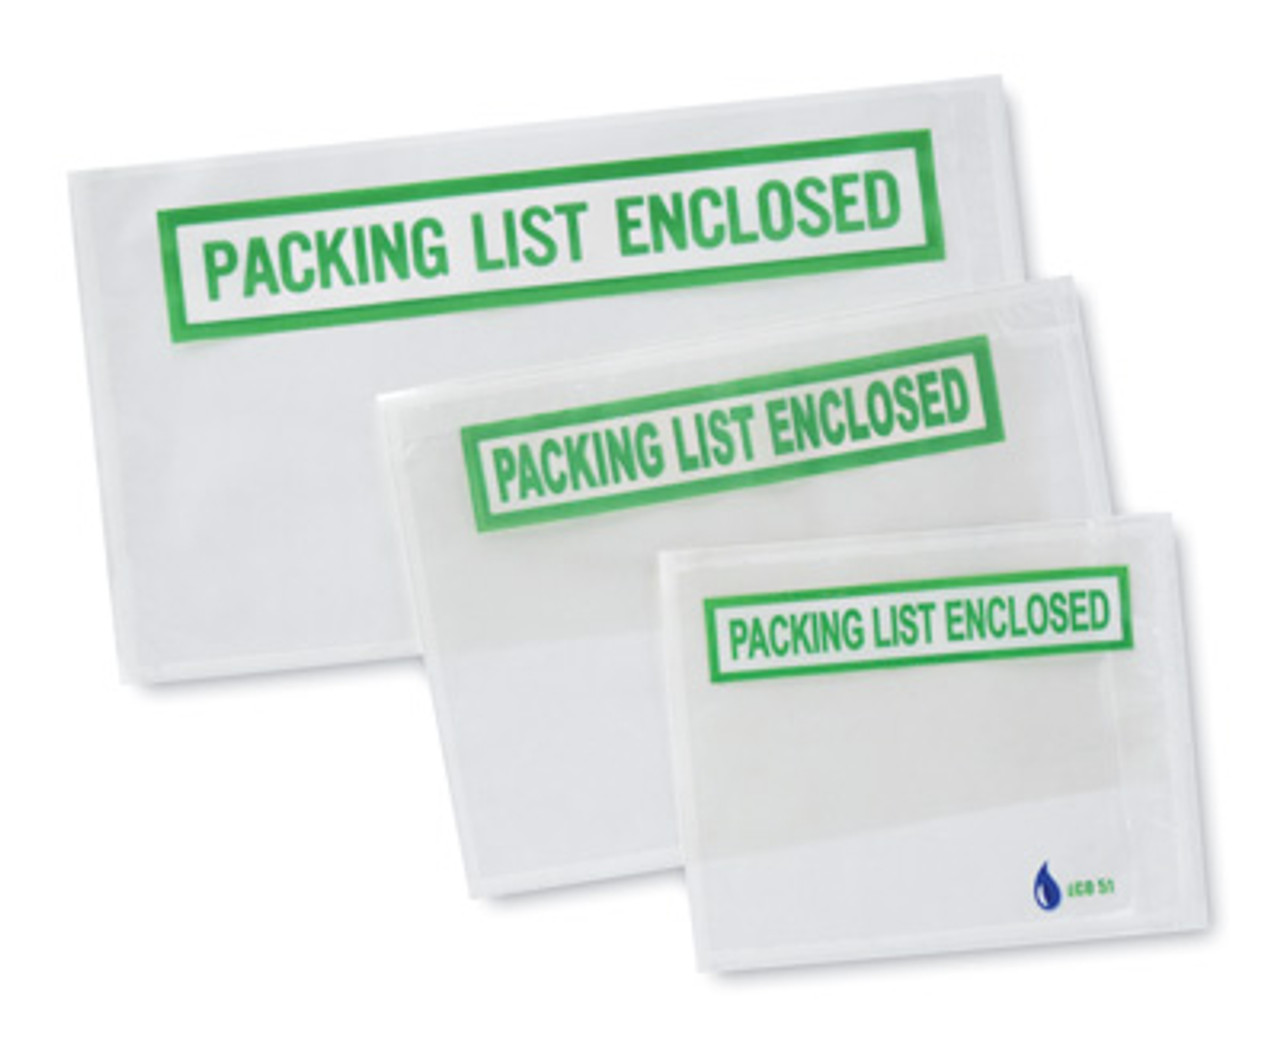 Eco Friendly Back-Loading Printed Packing List Envelopes - "Packing List Enclosed" (Qty) 1000 Items